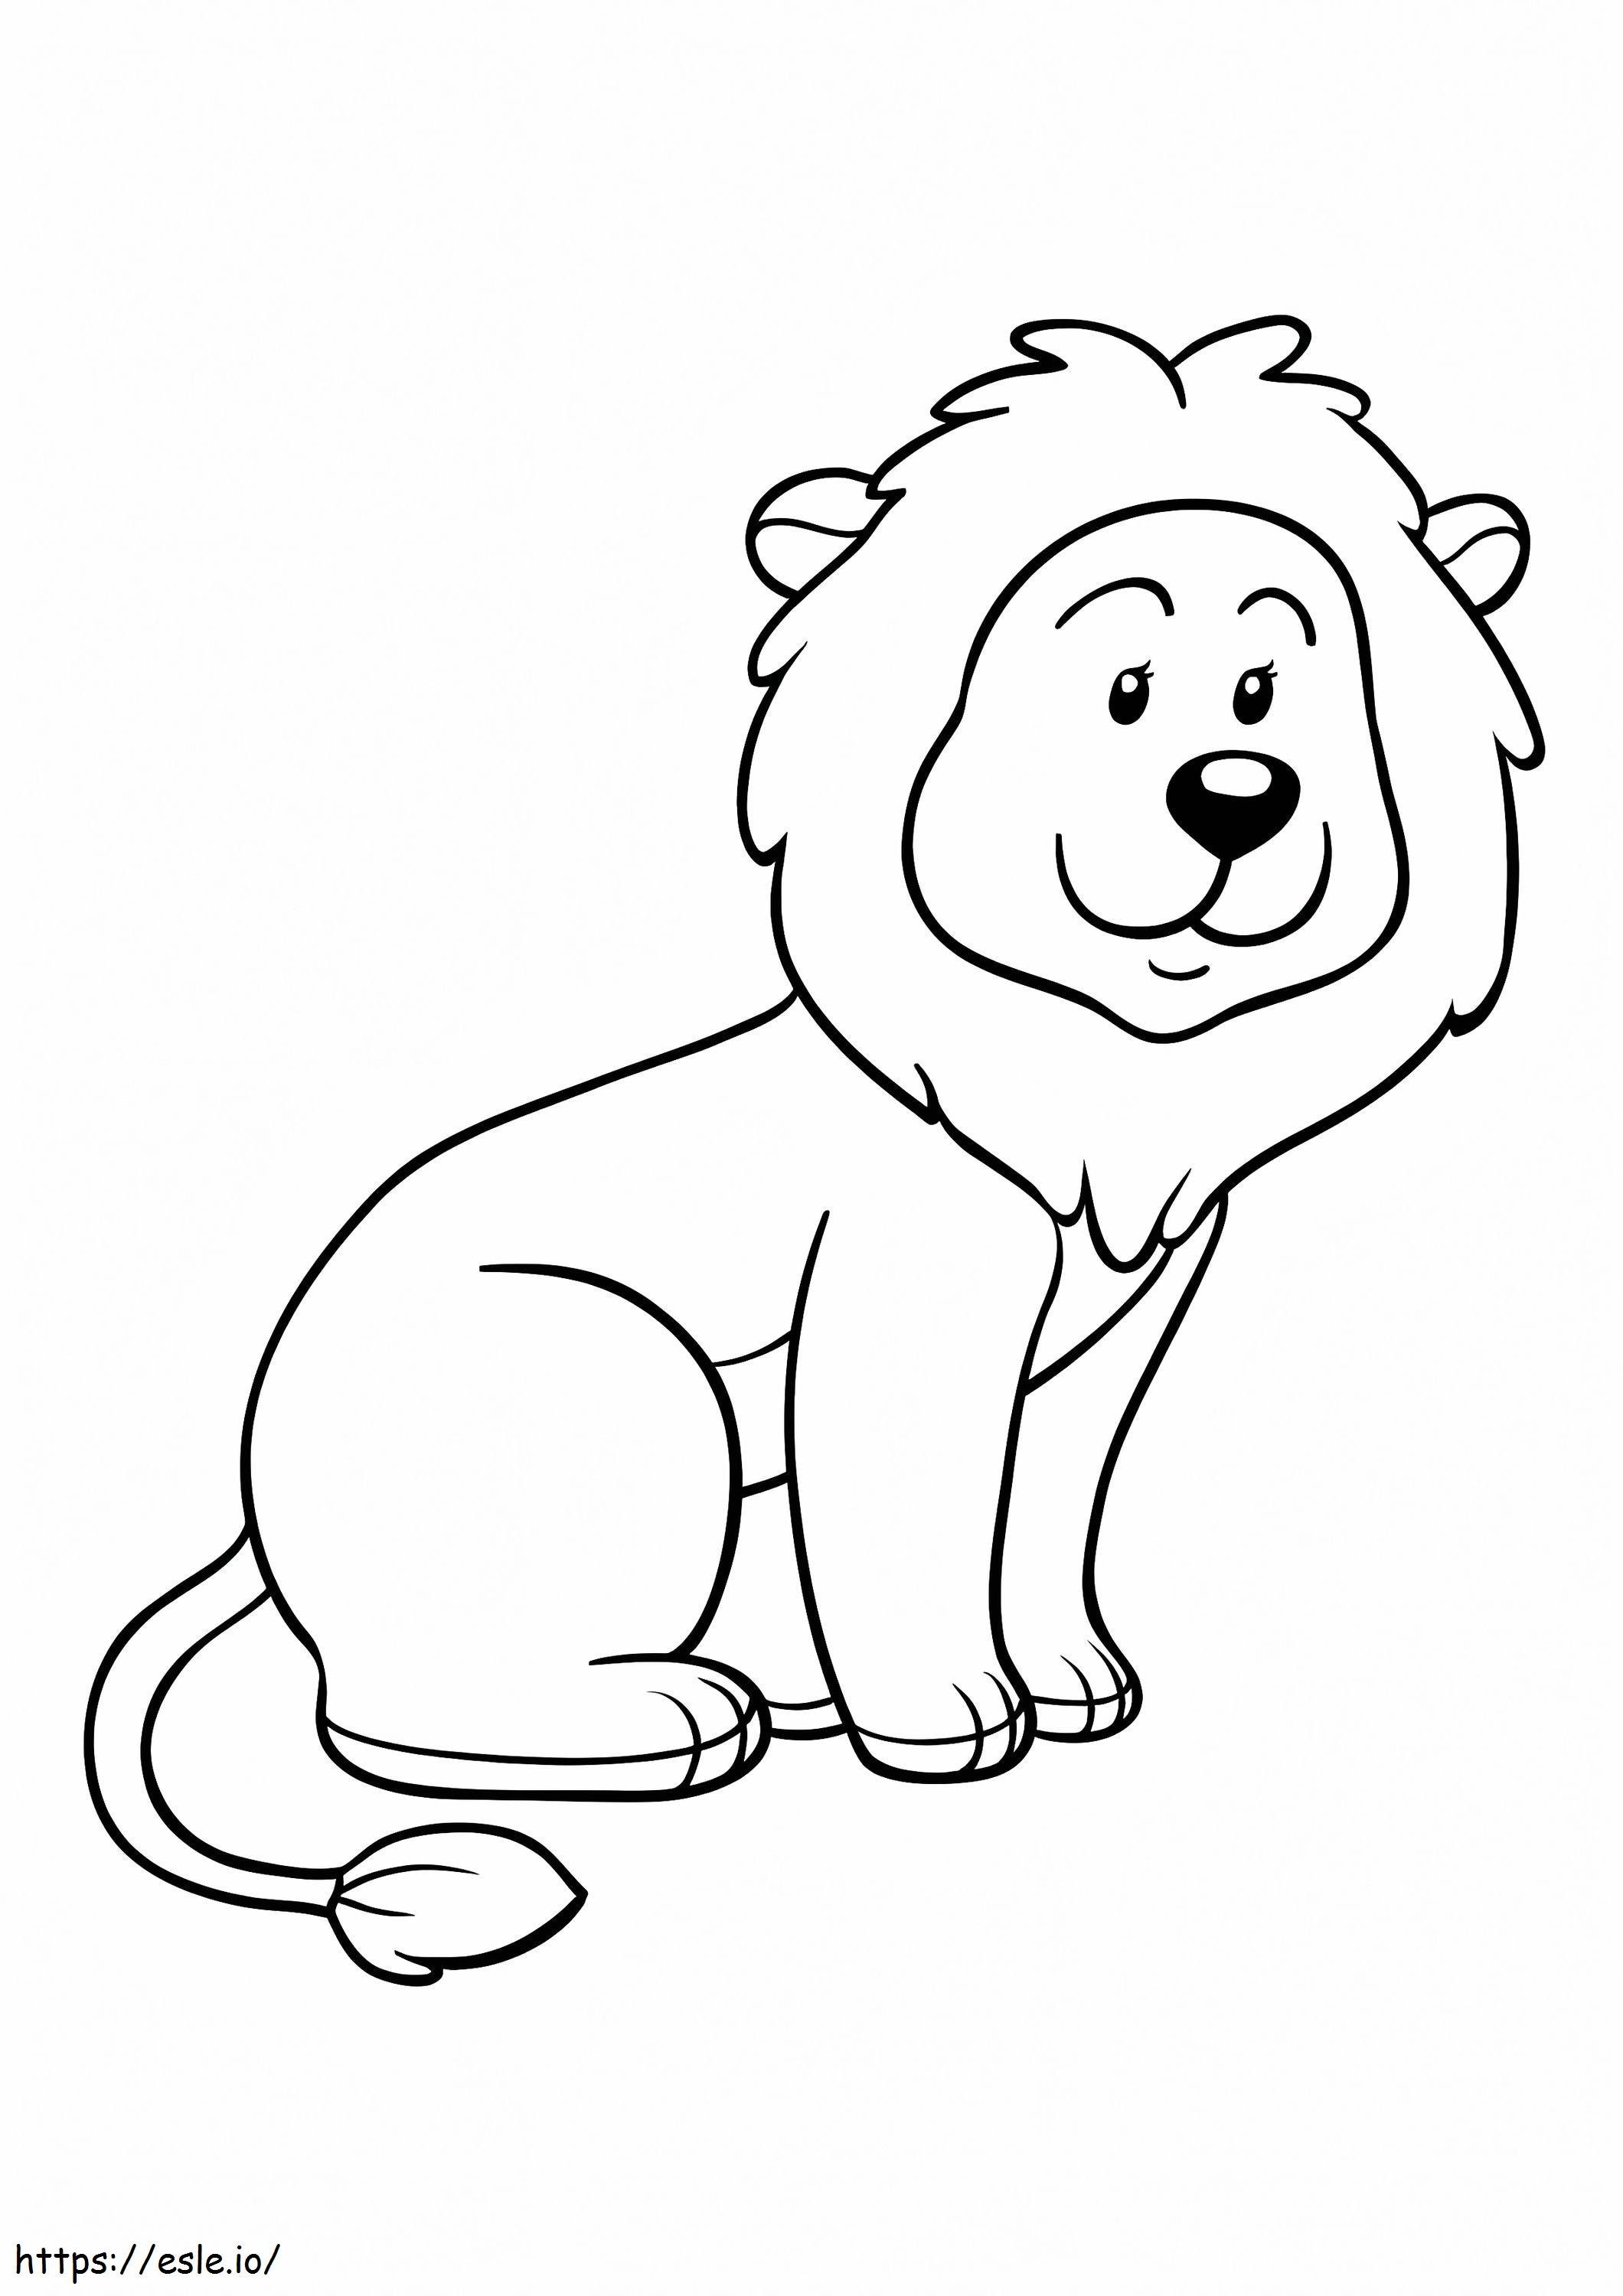 Printable Cute Lion coloring page